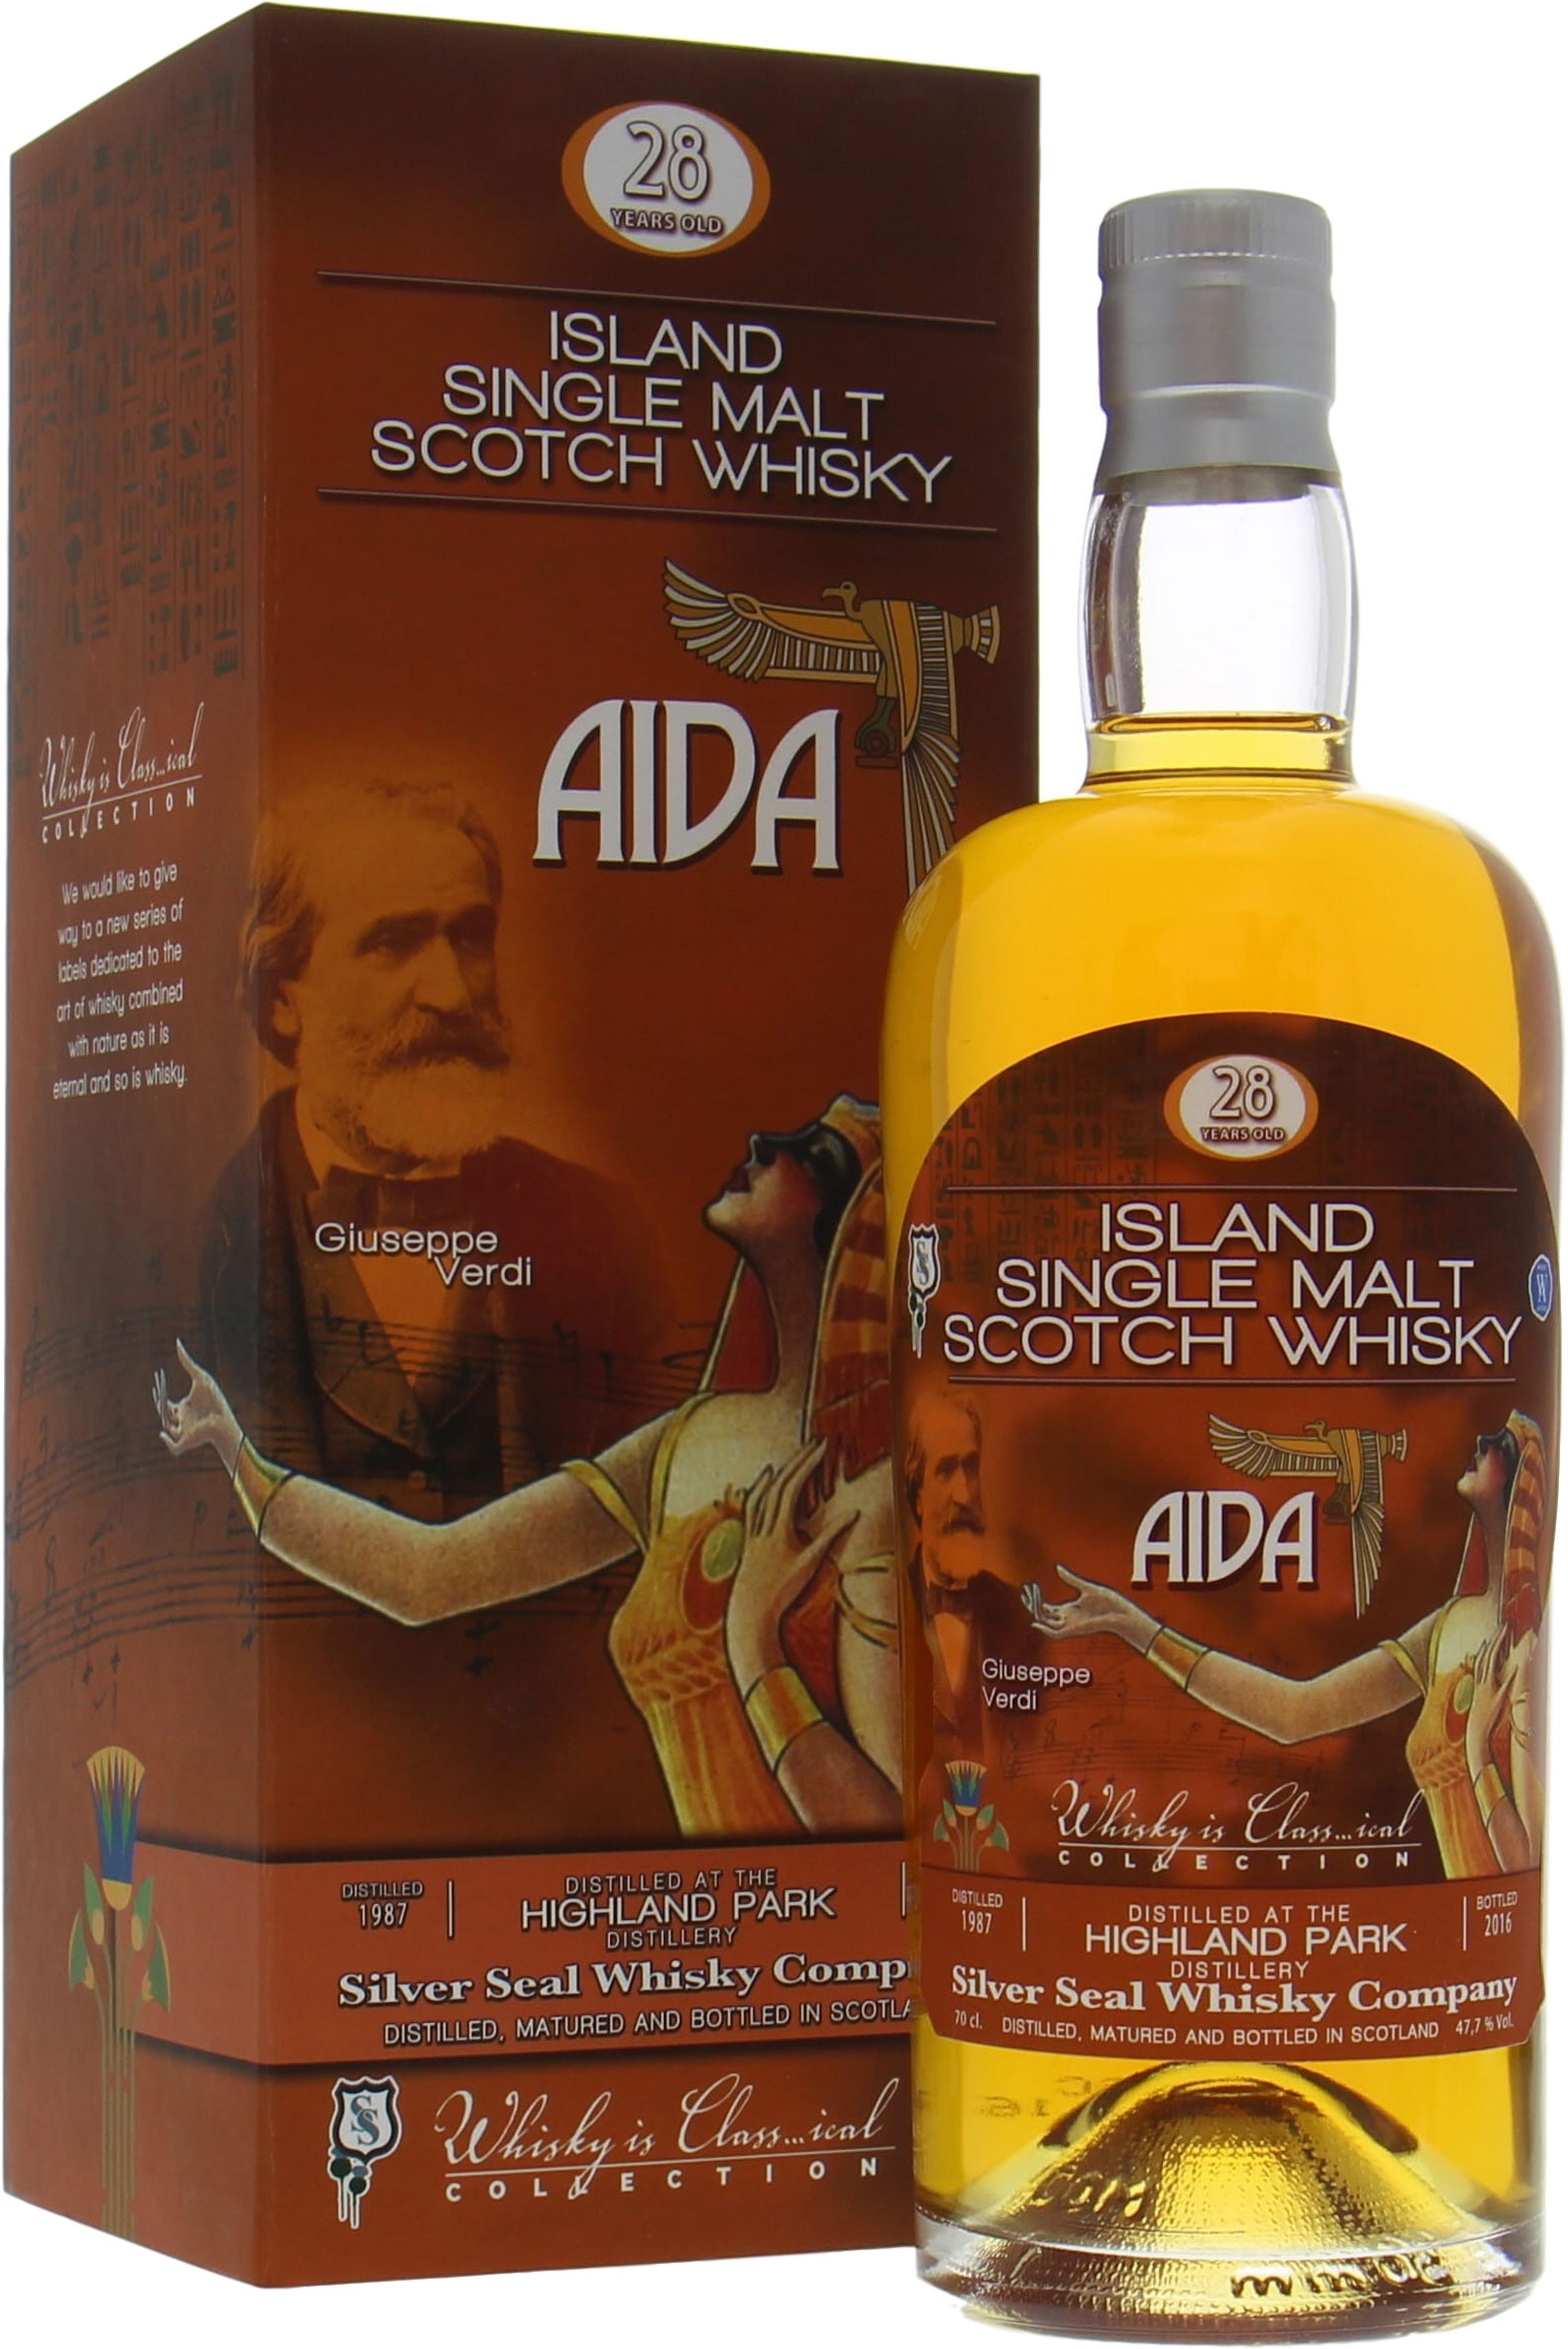 Highland Park - 28 Years Old Silver Seal Giuseppe Verdi Aida Cask:1555 47.7% 1987 In Original Container